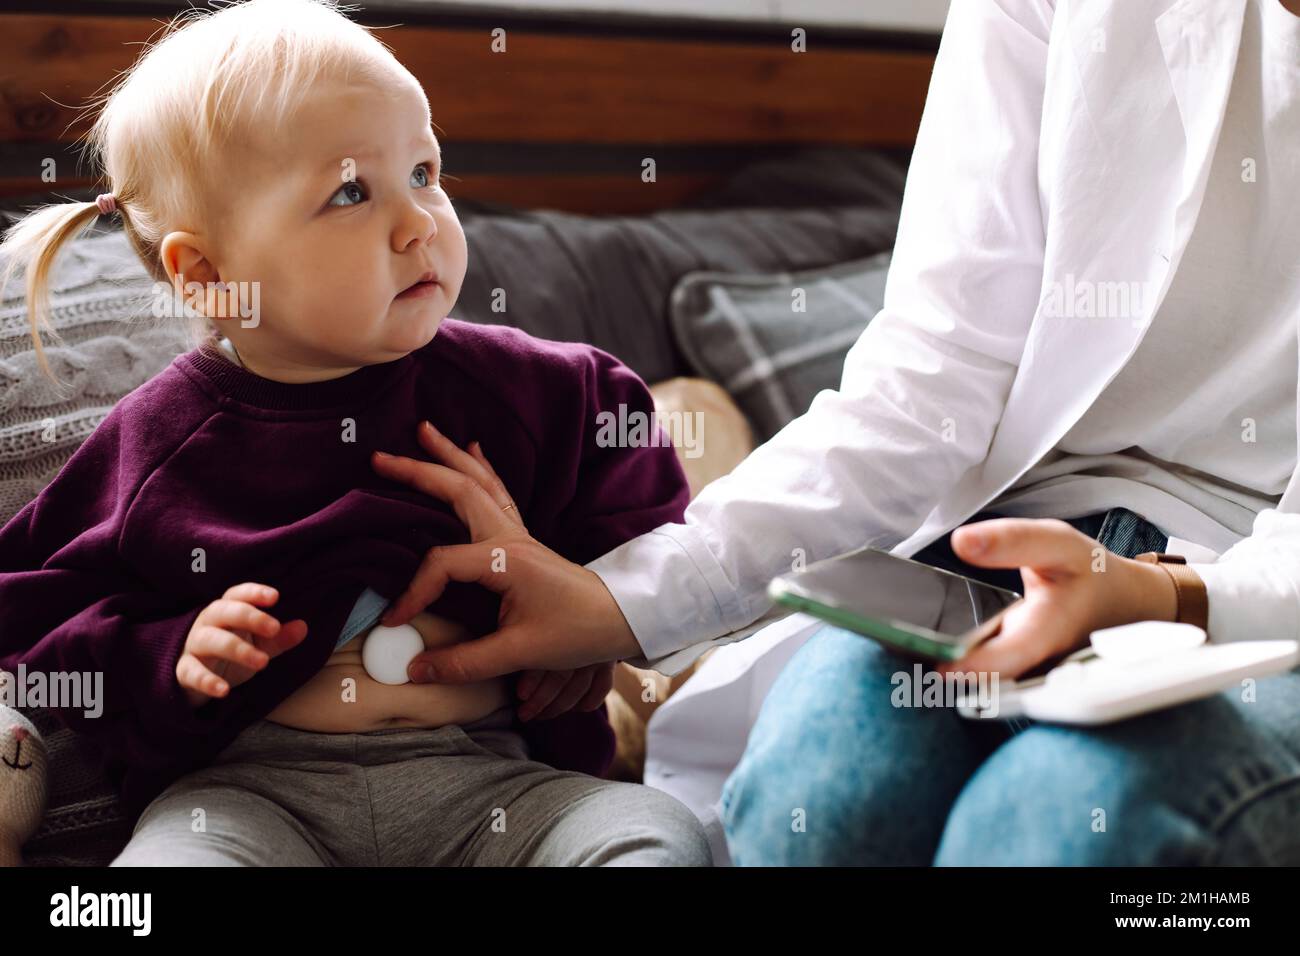 Sad little girl sitting on sofa, looking at primary care pediatrician measuring temperature with digital thermometer. Stock Photo